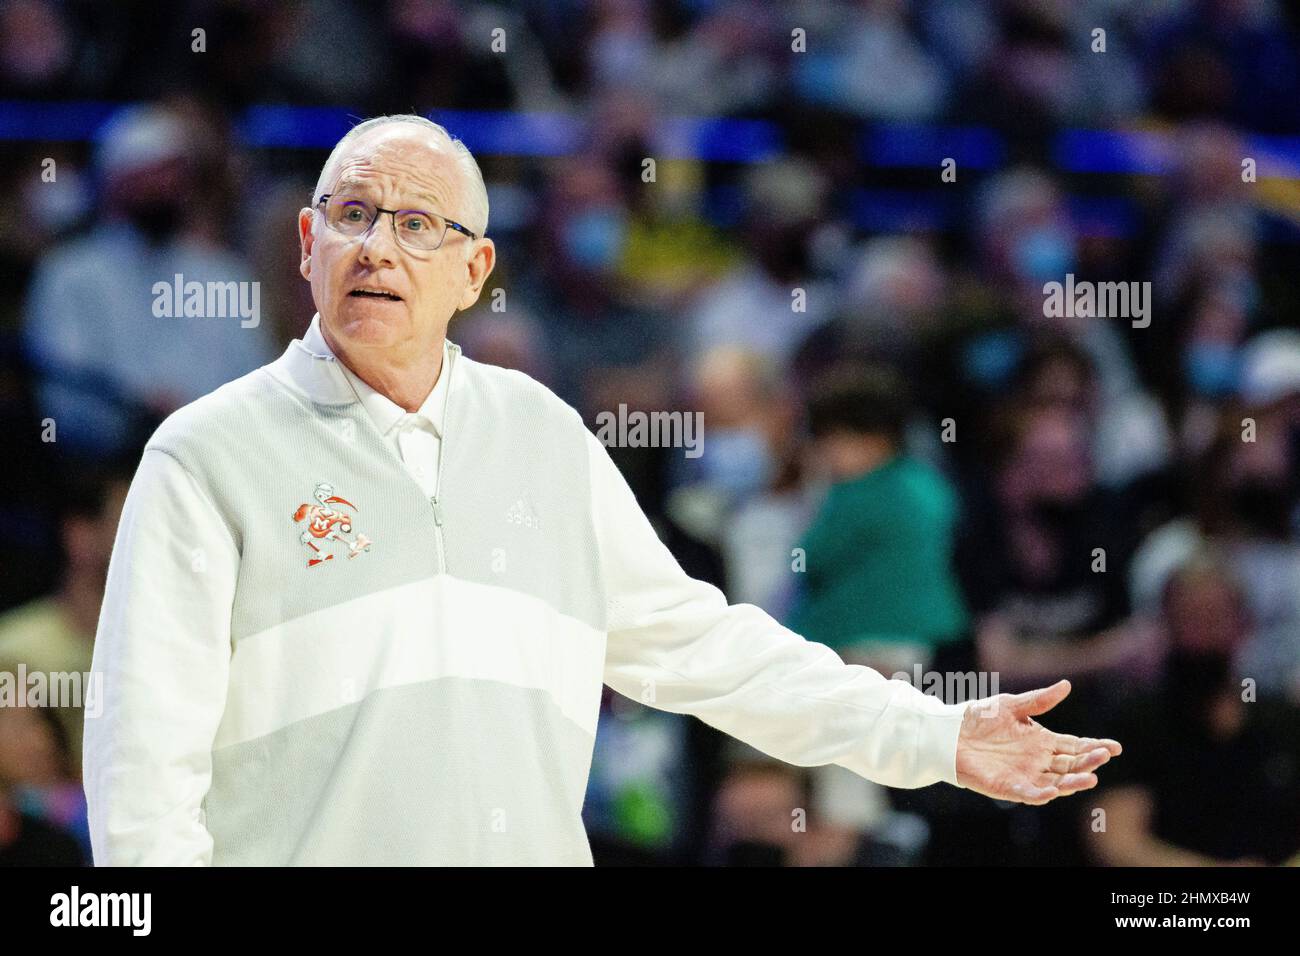 Winston-Salem, NC, USA. 12th Feb, 2022. Miami (Fl) Hurricanes head coach Jim Larra-aga reacts to the call during the first half against the Wake Forest Demon Deacons in the ACC Basketball matchup at LJVM Coliseum in Winston-Salem, NC. (Scott Kinser/Cal Sport Media). Credit: csm/Alamy Live News Stock Photo